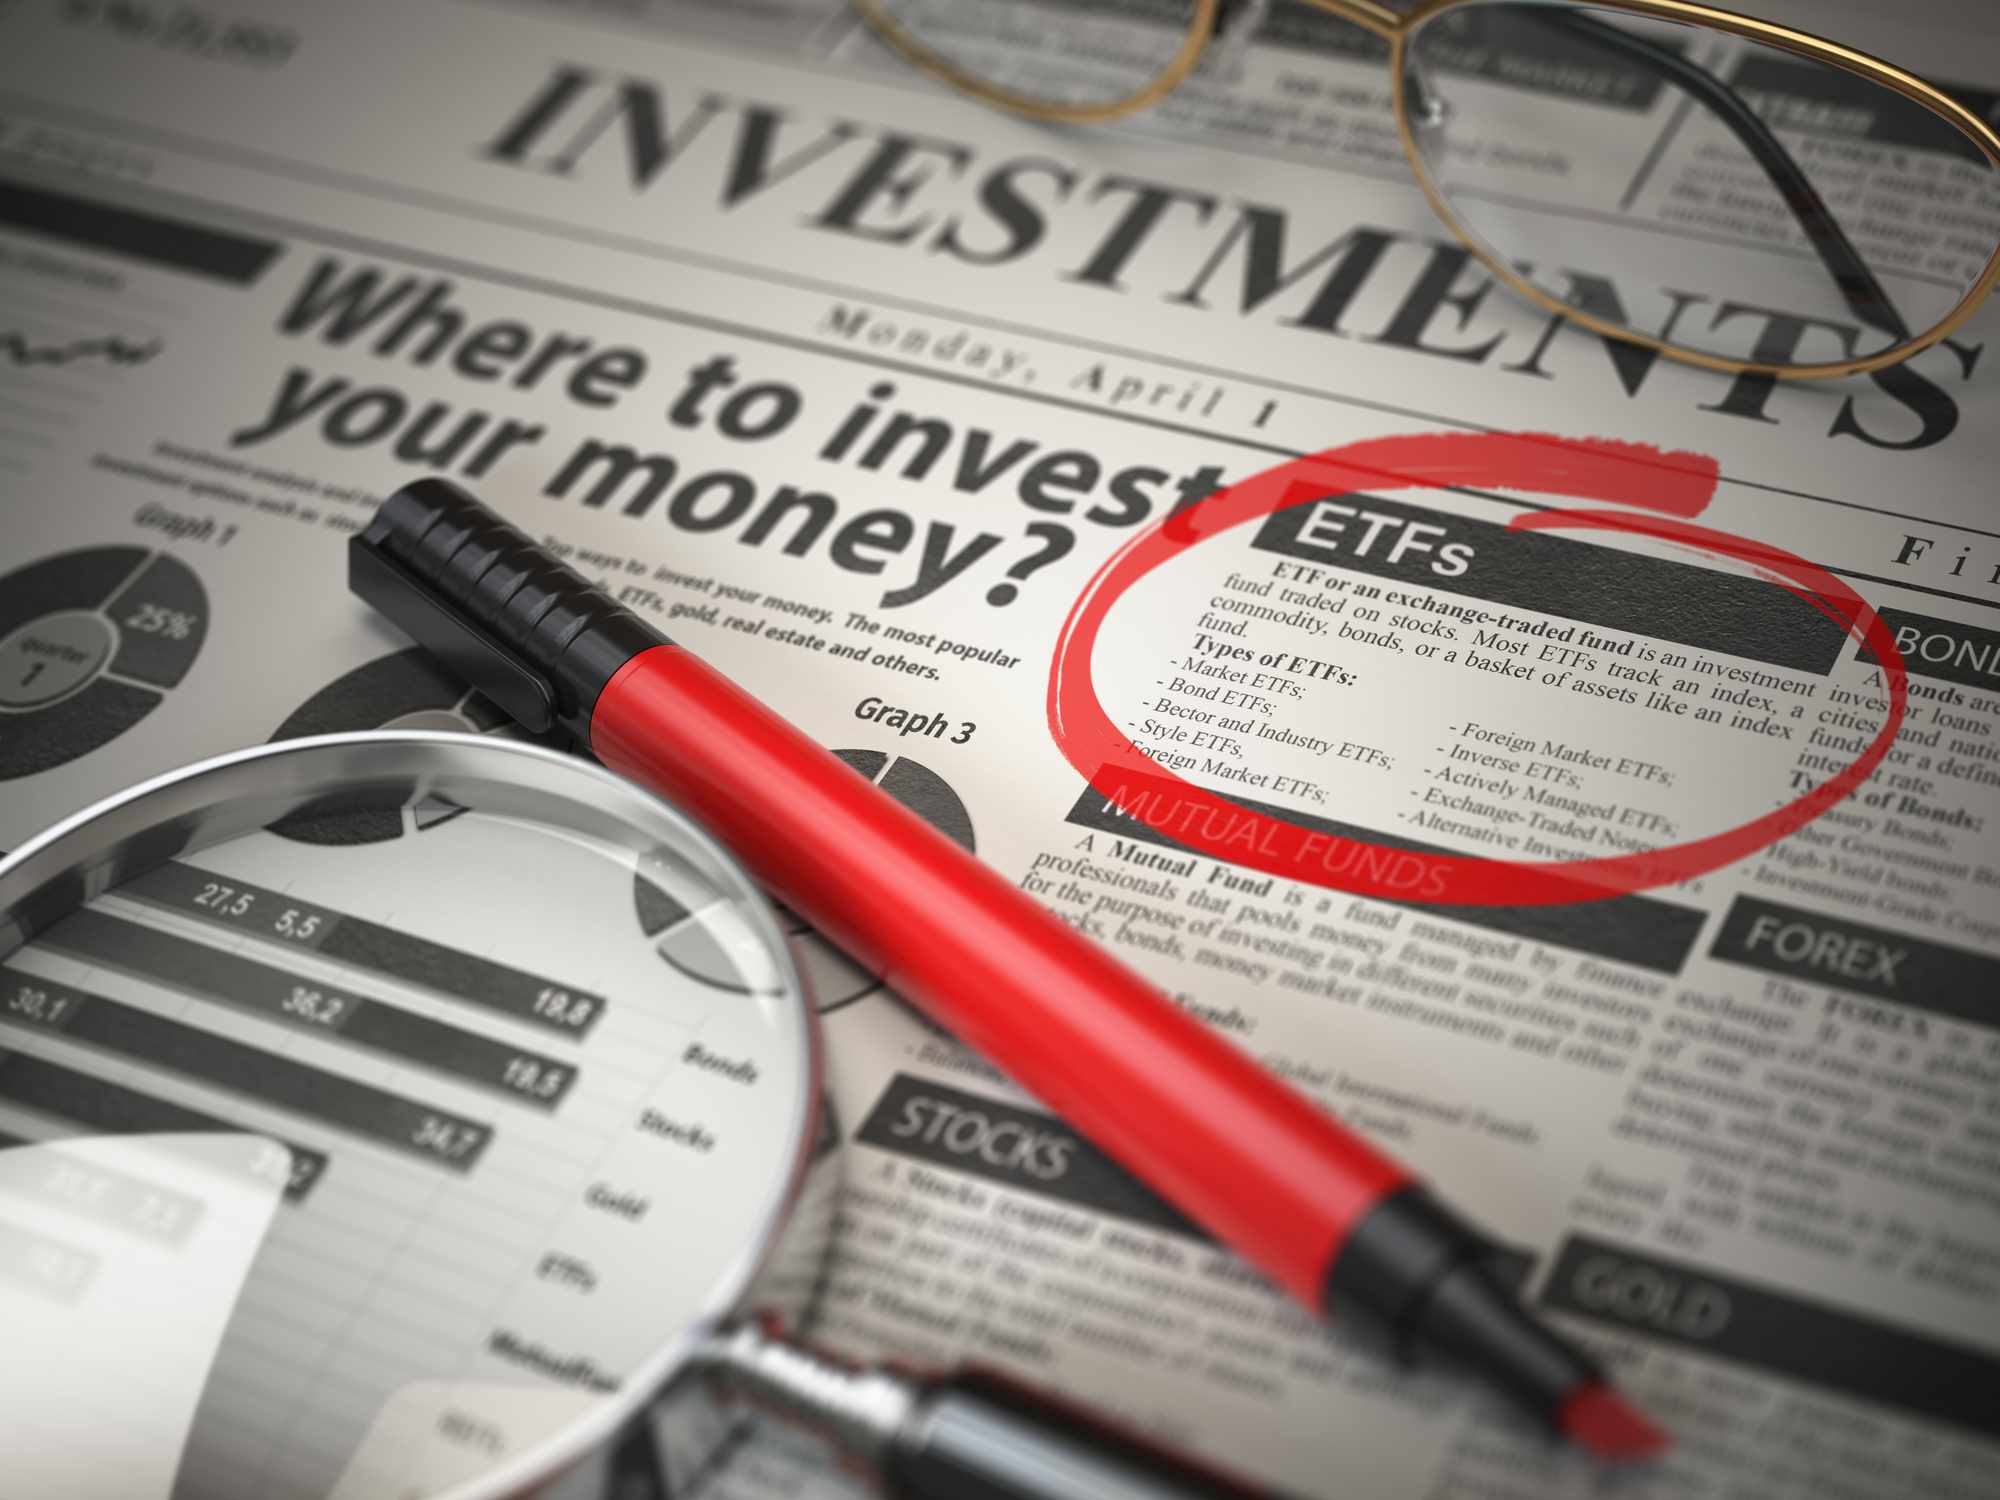 A newspaper with a red marker, a magnifying glass, and a section on exchange-traded funds (ETFs) highlighted.